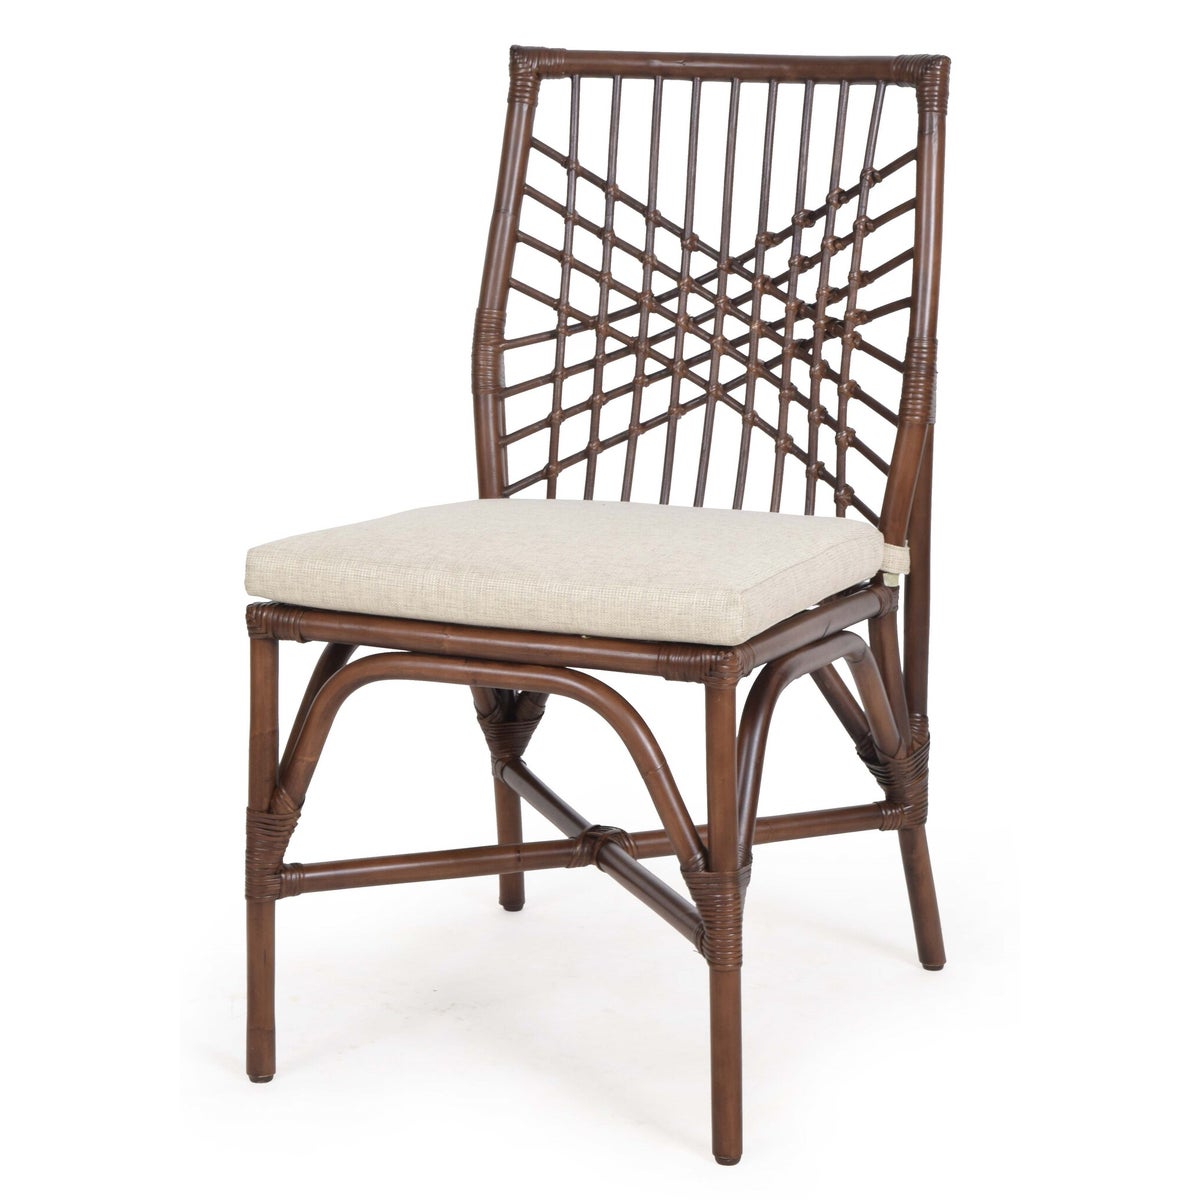 CLOSE-OUT!!Harper Side  Chair Frame Color - Tobacco Cushion Color - Cream 50% OFF!This Item Wi